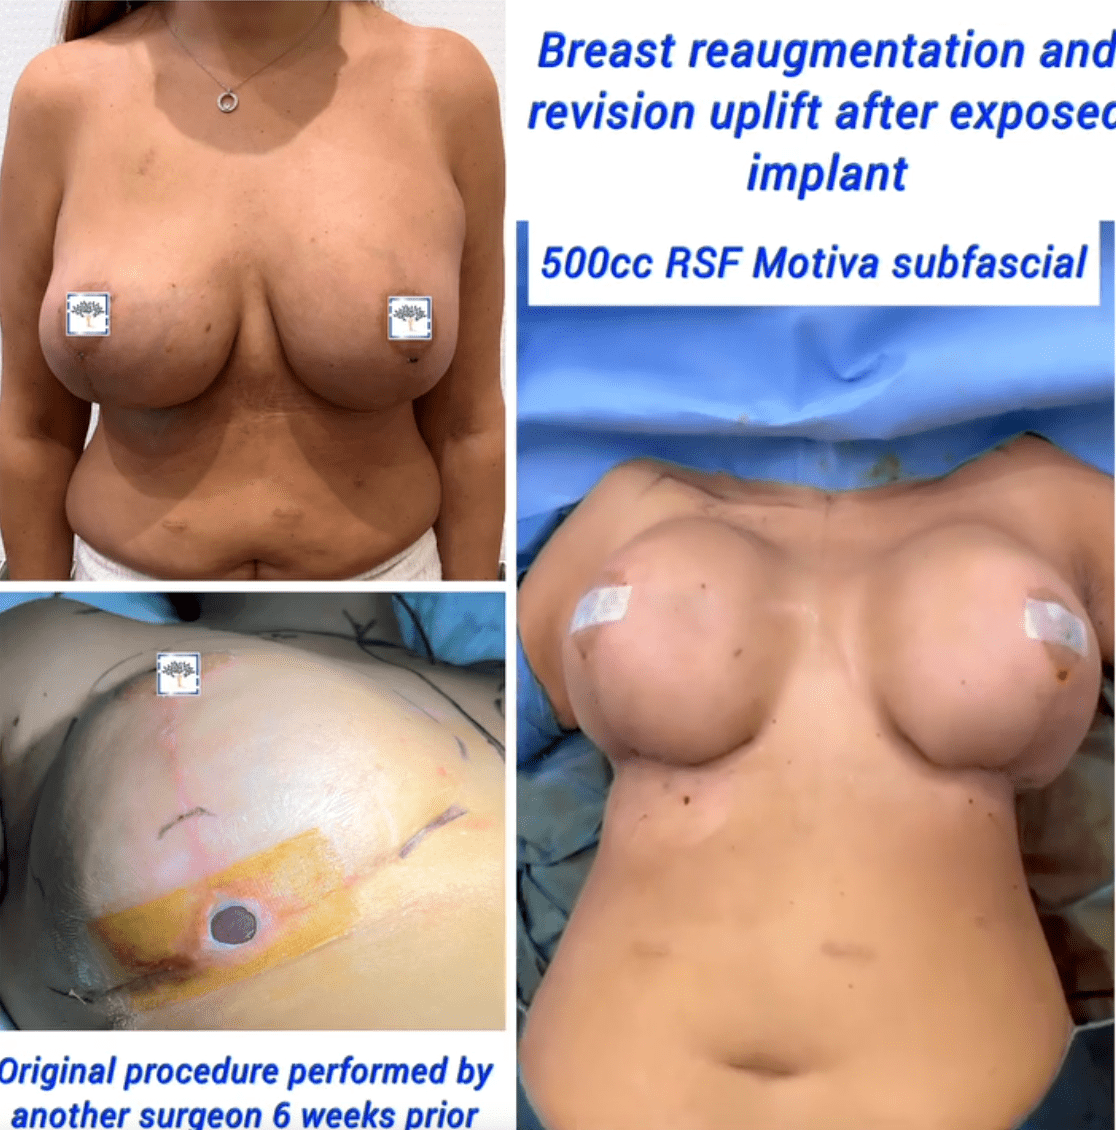 Breast re-augmentation and uplift after exposed implant - the Harley Clinic